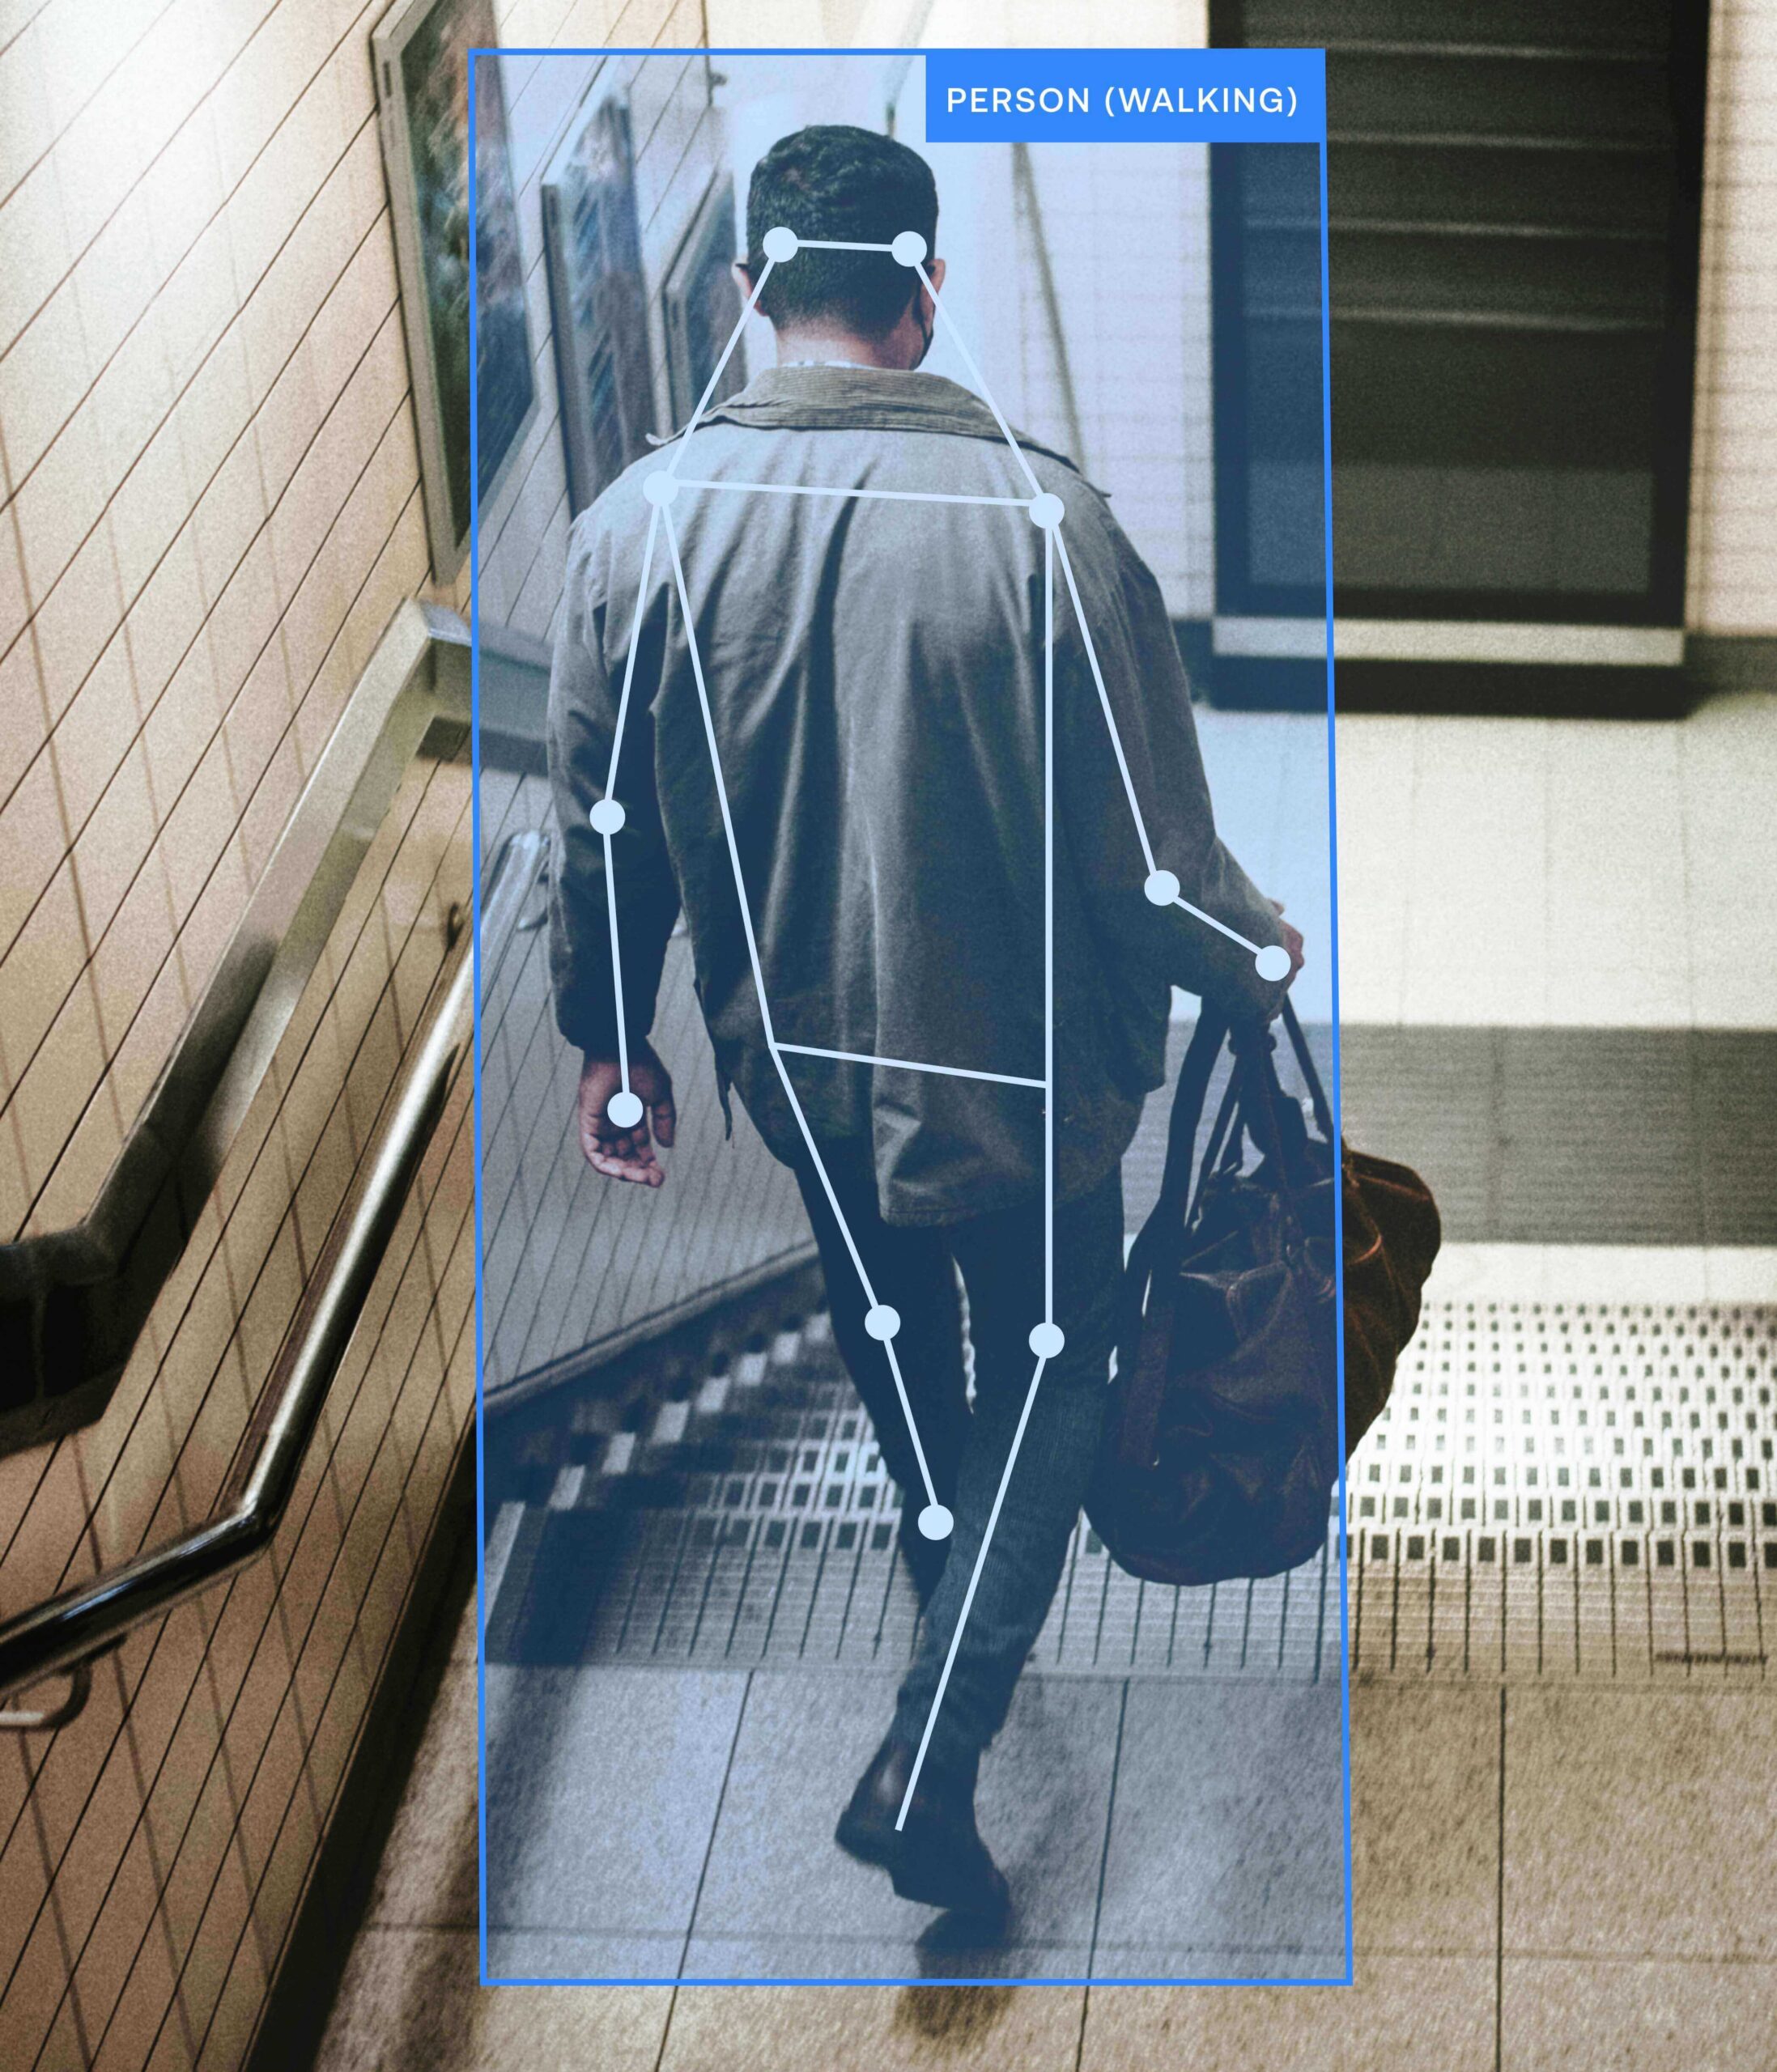 Ethical AI detecting a person walking